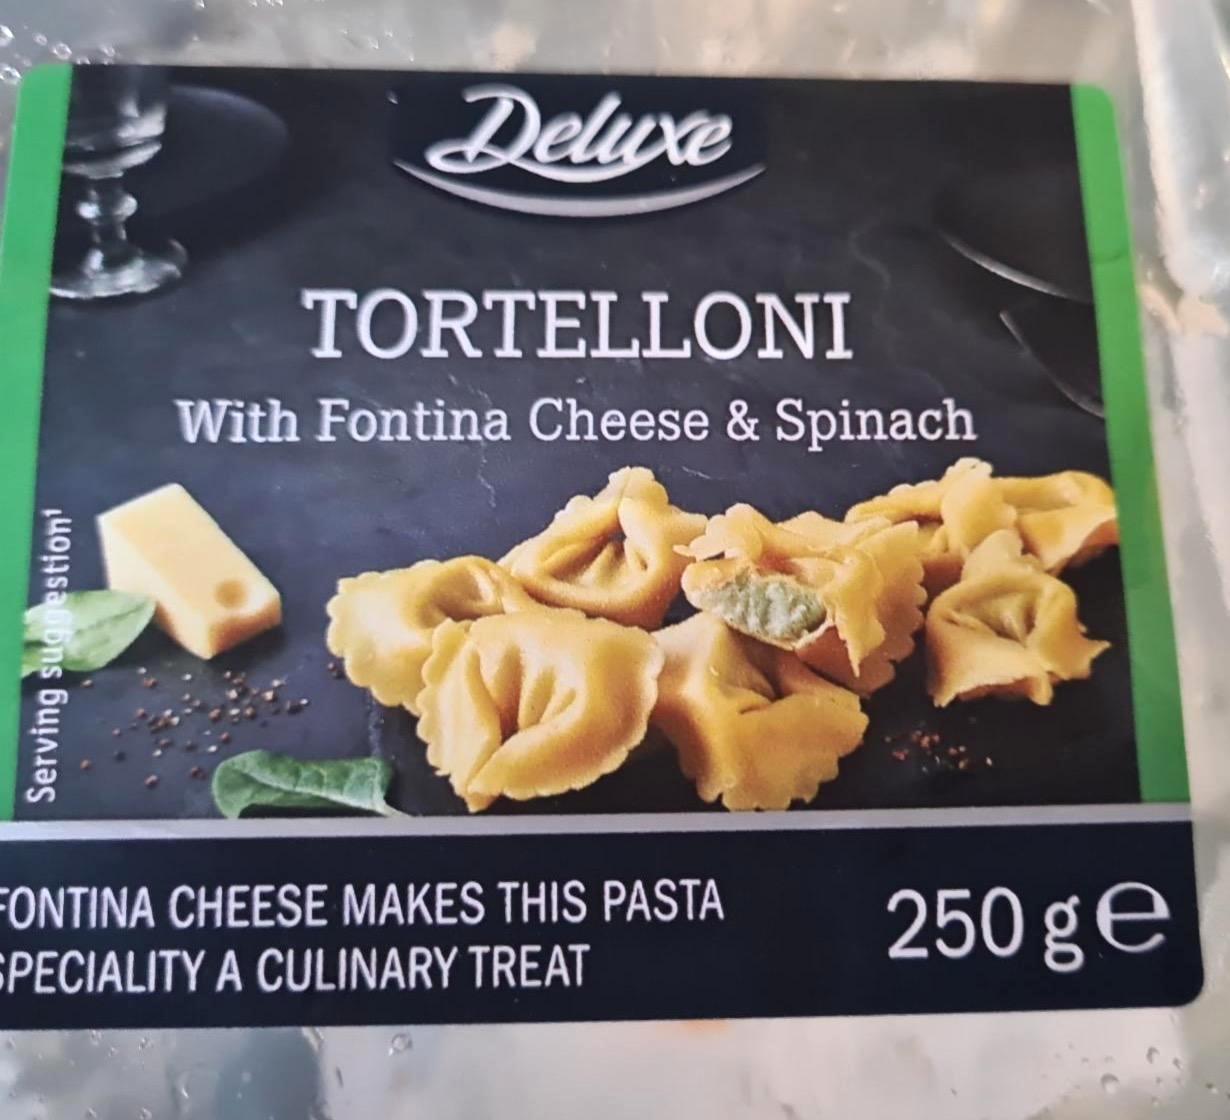 Képek - Tortelloni fontina chees & spinach Deluxe